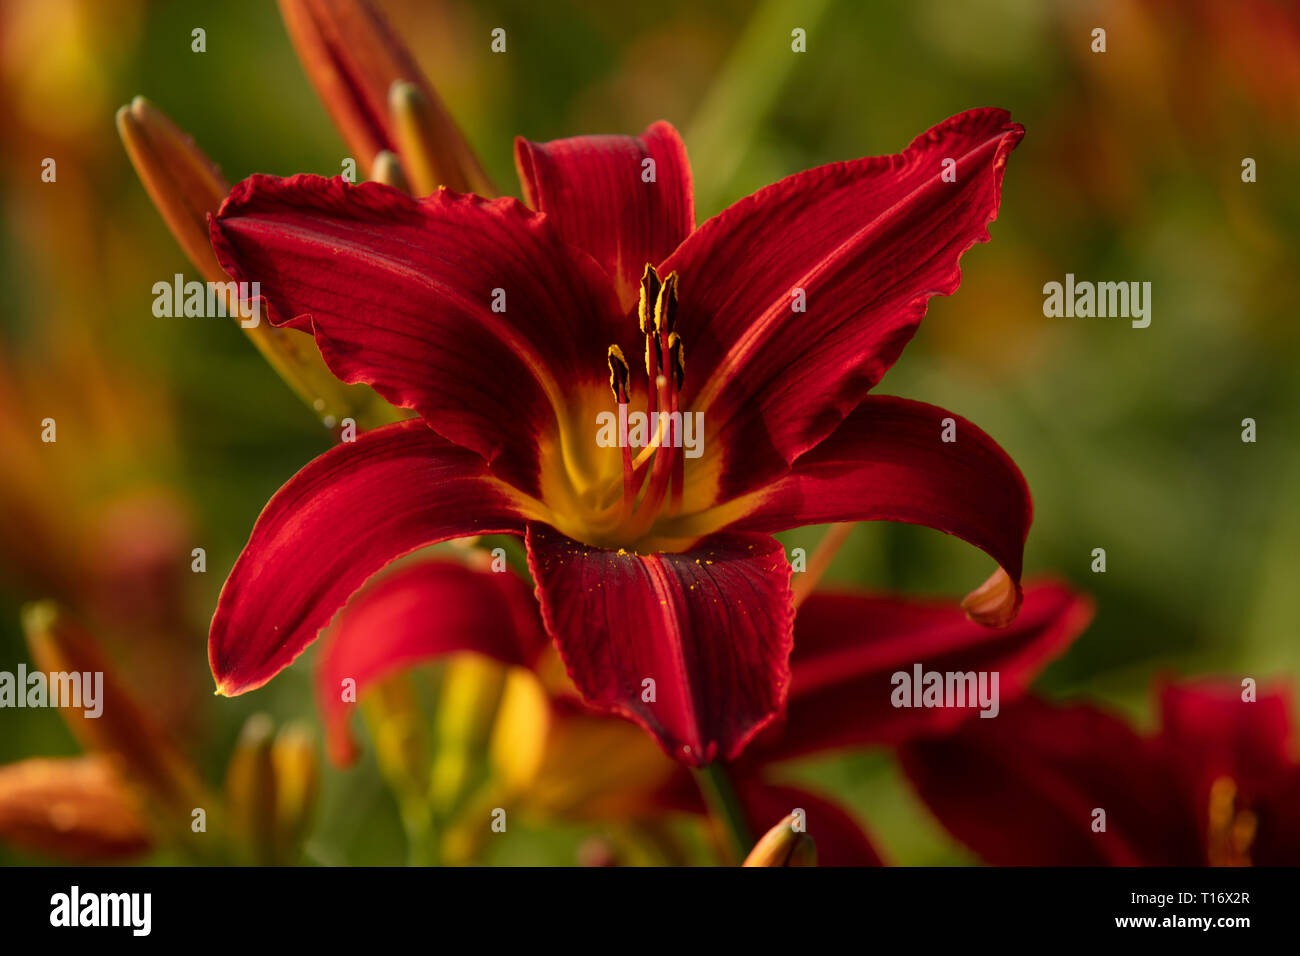 Hemerocallis Stafford or Day Lily, are deciduous perennial garden plants, with dark red flowers, yellow stripes and golden centre flowering in summer. Stock Photo